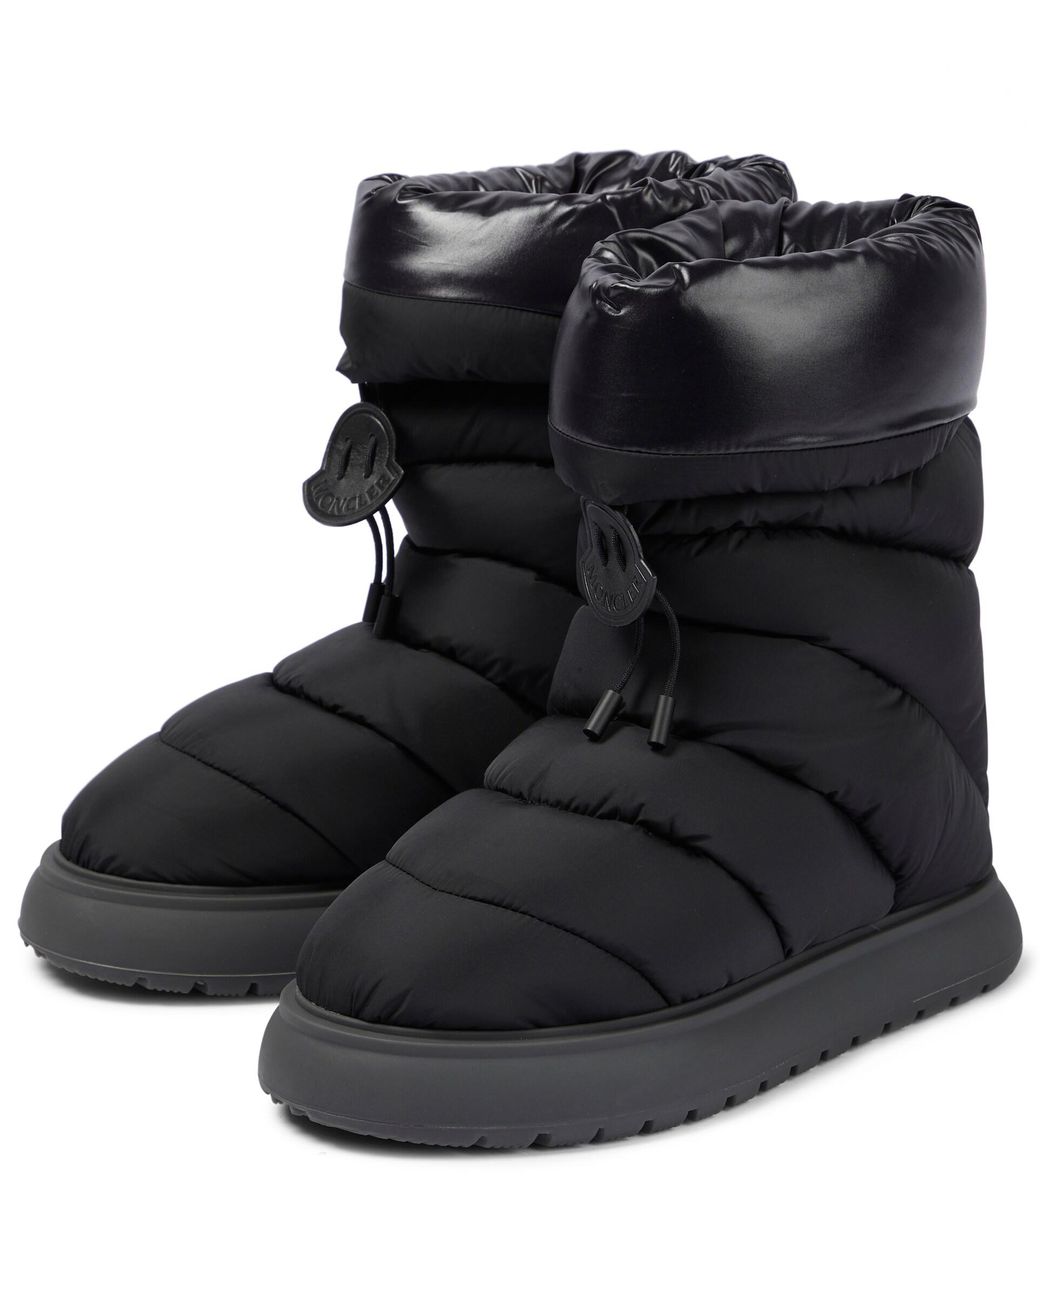 Moncler Gaia Padded Ankle Boots in Black | Lyst